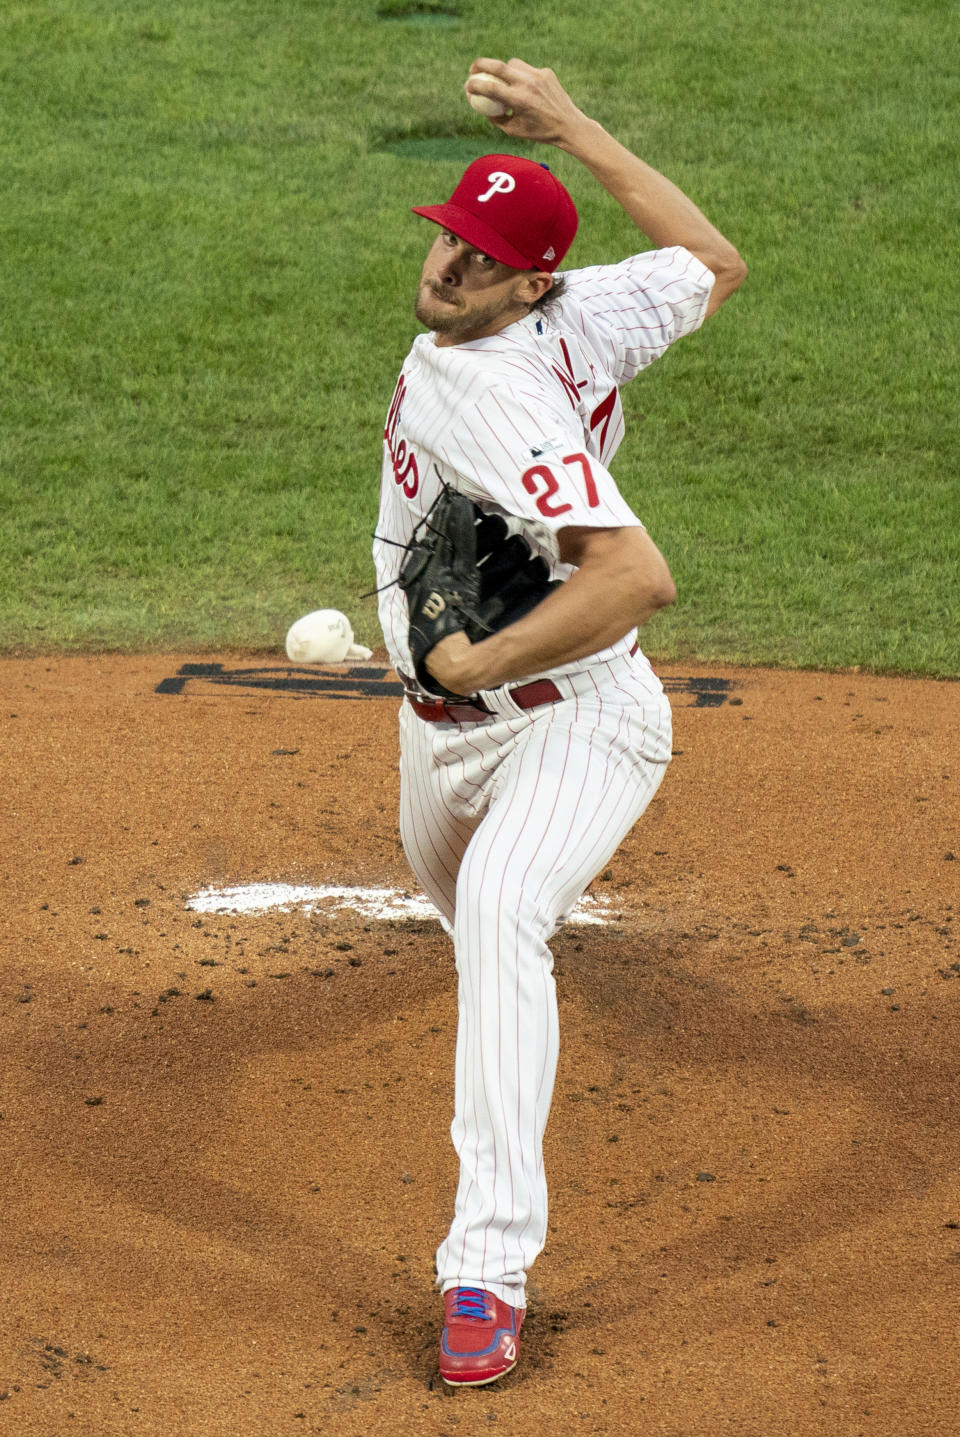 Philadelphia Phillies starting pitcher Aaron Nola throws during the first inning of a baseball game against the Miami Marlins, Friday, July 24, 2020, in Philadelphia. (AP Photo/Chris Szagola)